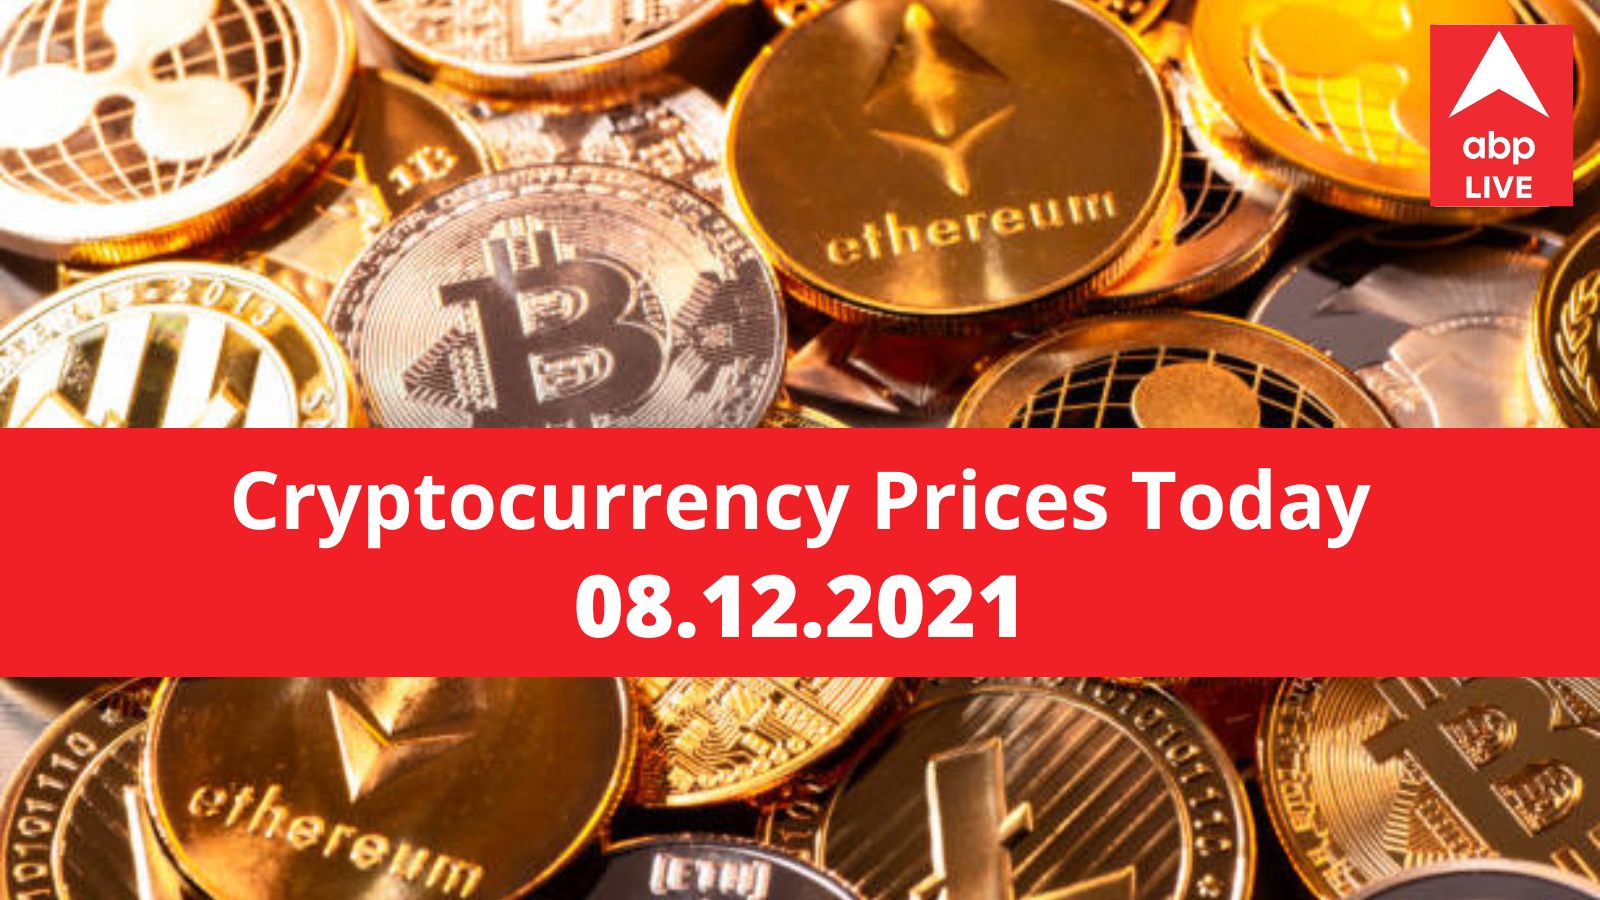 Cryptocurrency Prices On December 8 2021: Know The Rate Of Bitcoin, Ethereum,  Litecoin, Ripple, Dogecoin And Other Cryptocurrencies: